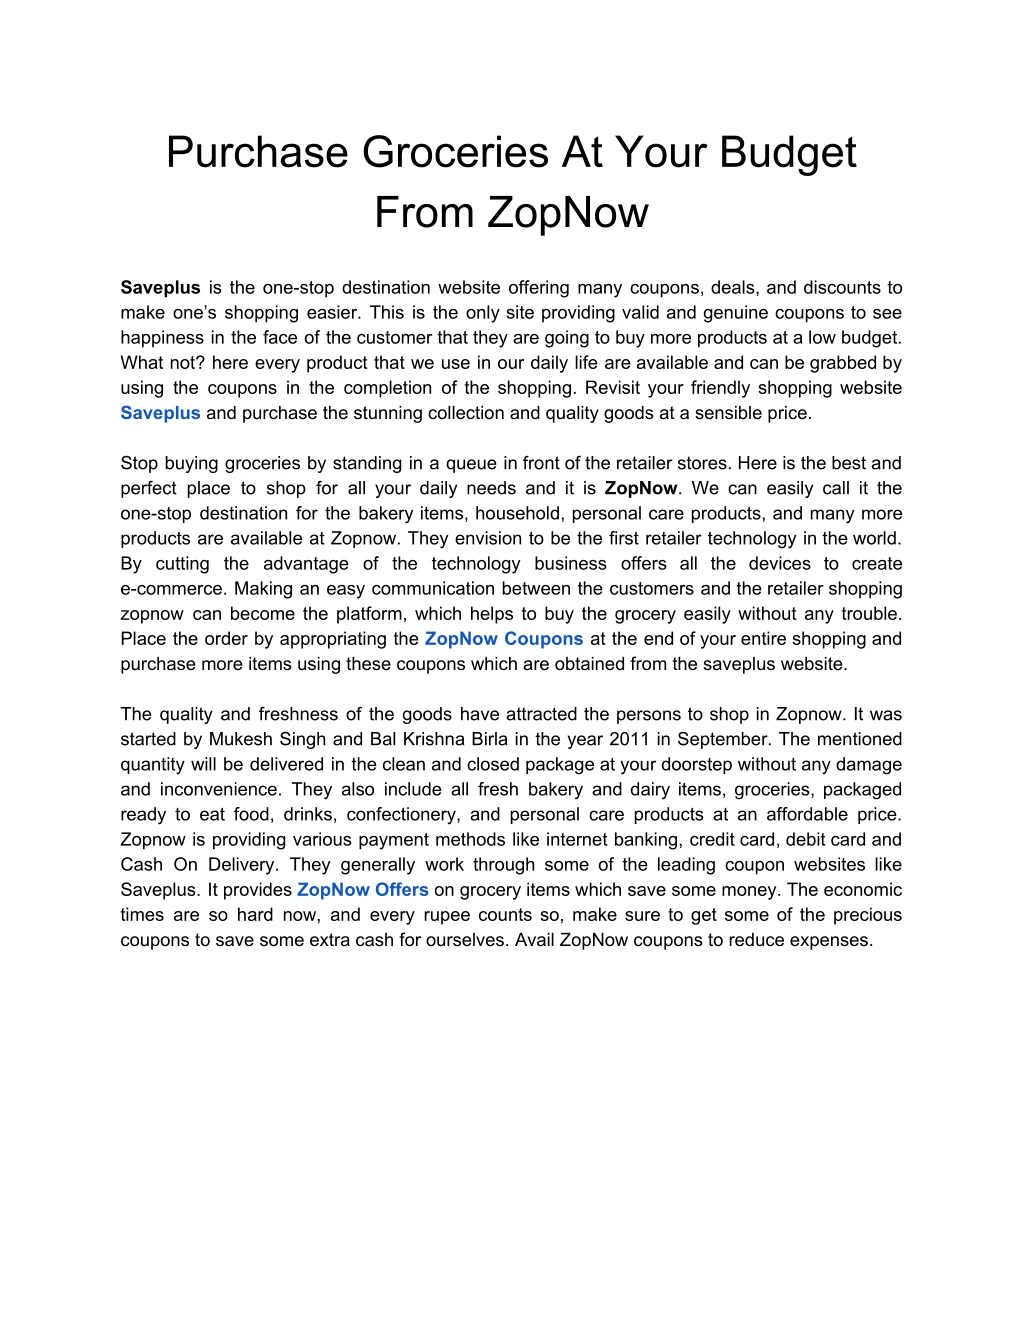 purchase groceries at your budget from zopnow